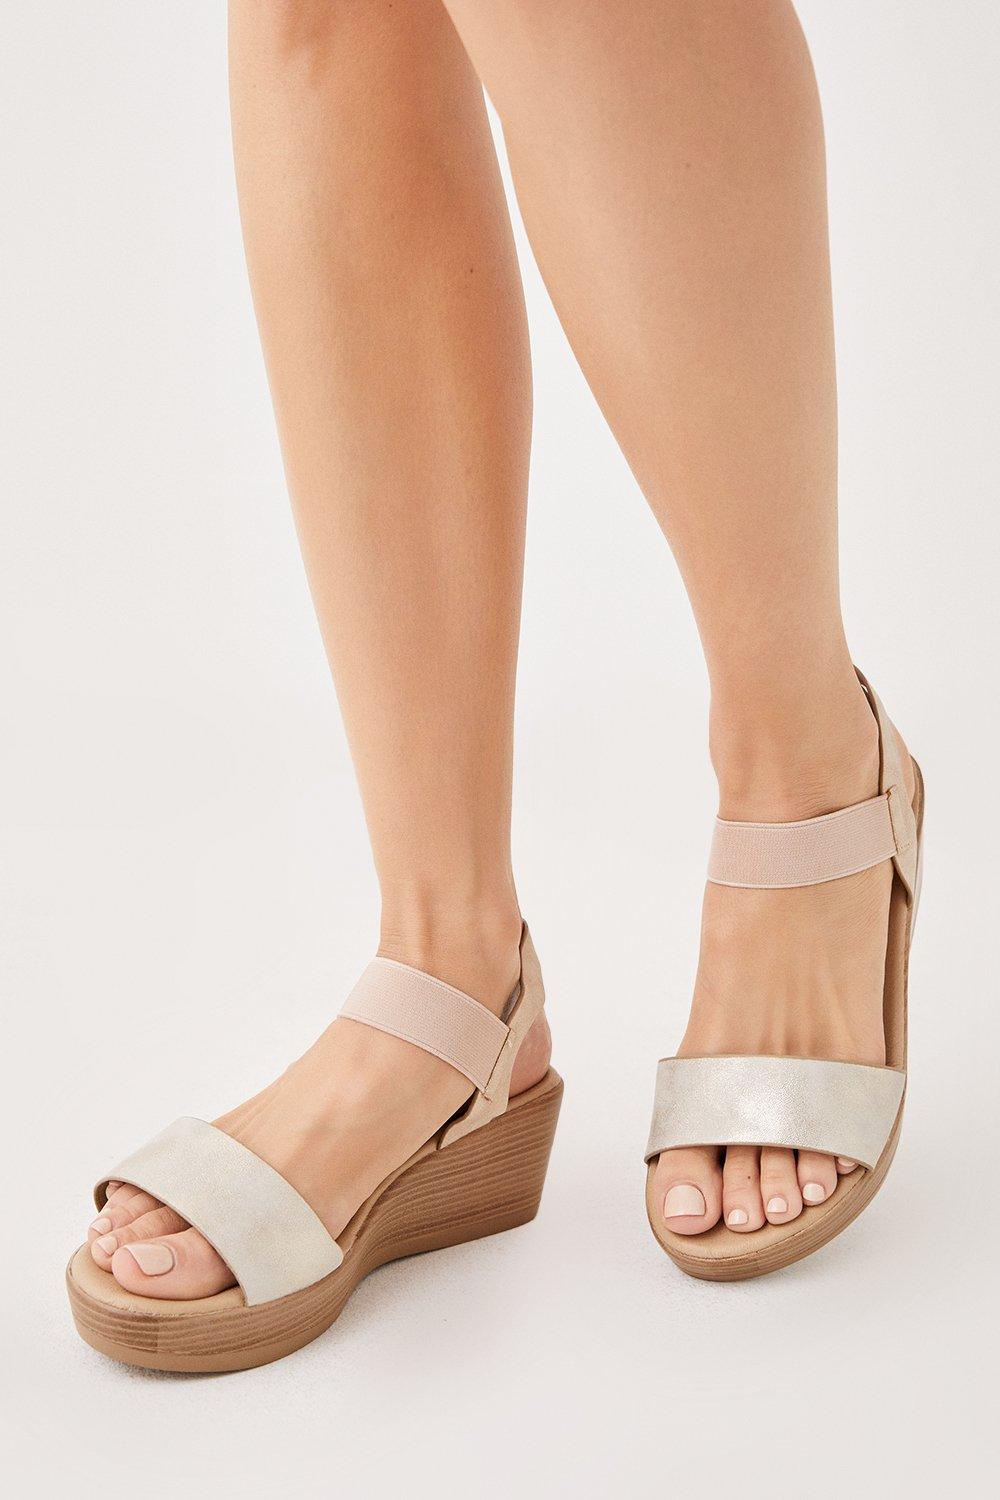 Womens Good For The Sole: Helena Comfort Elastic Wedges